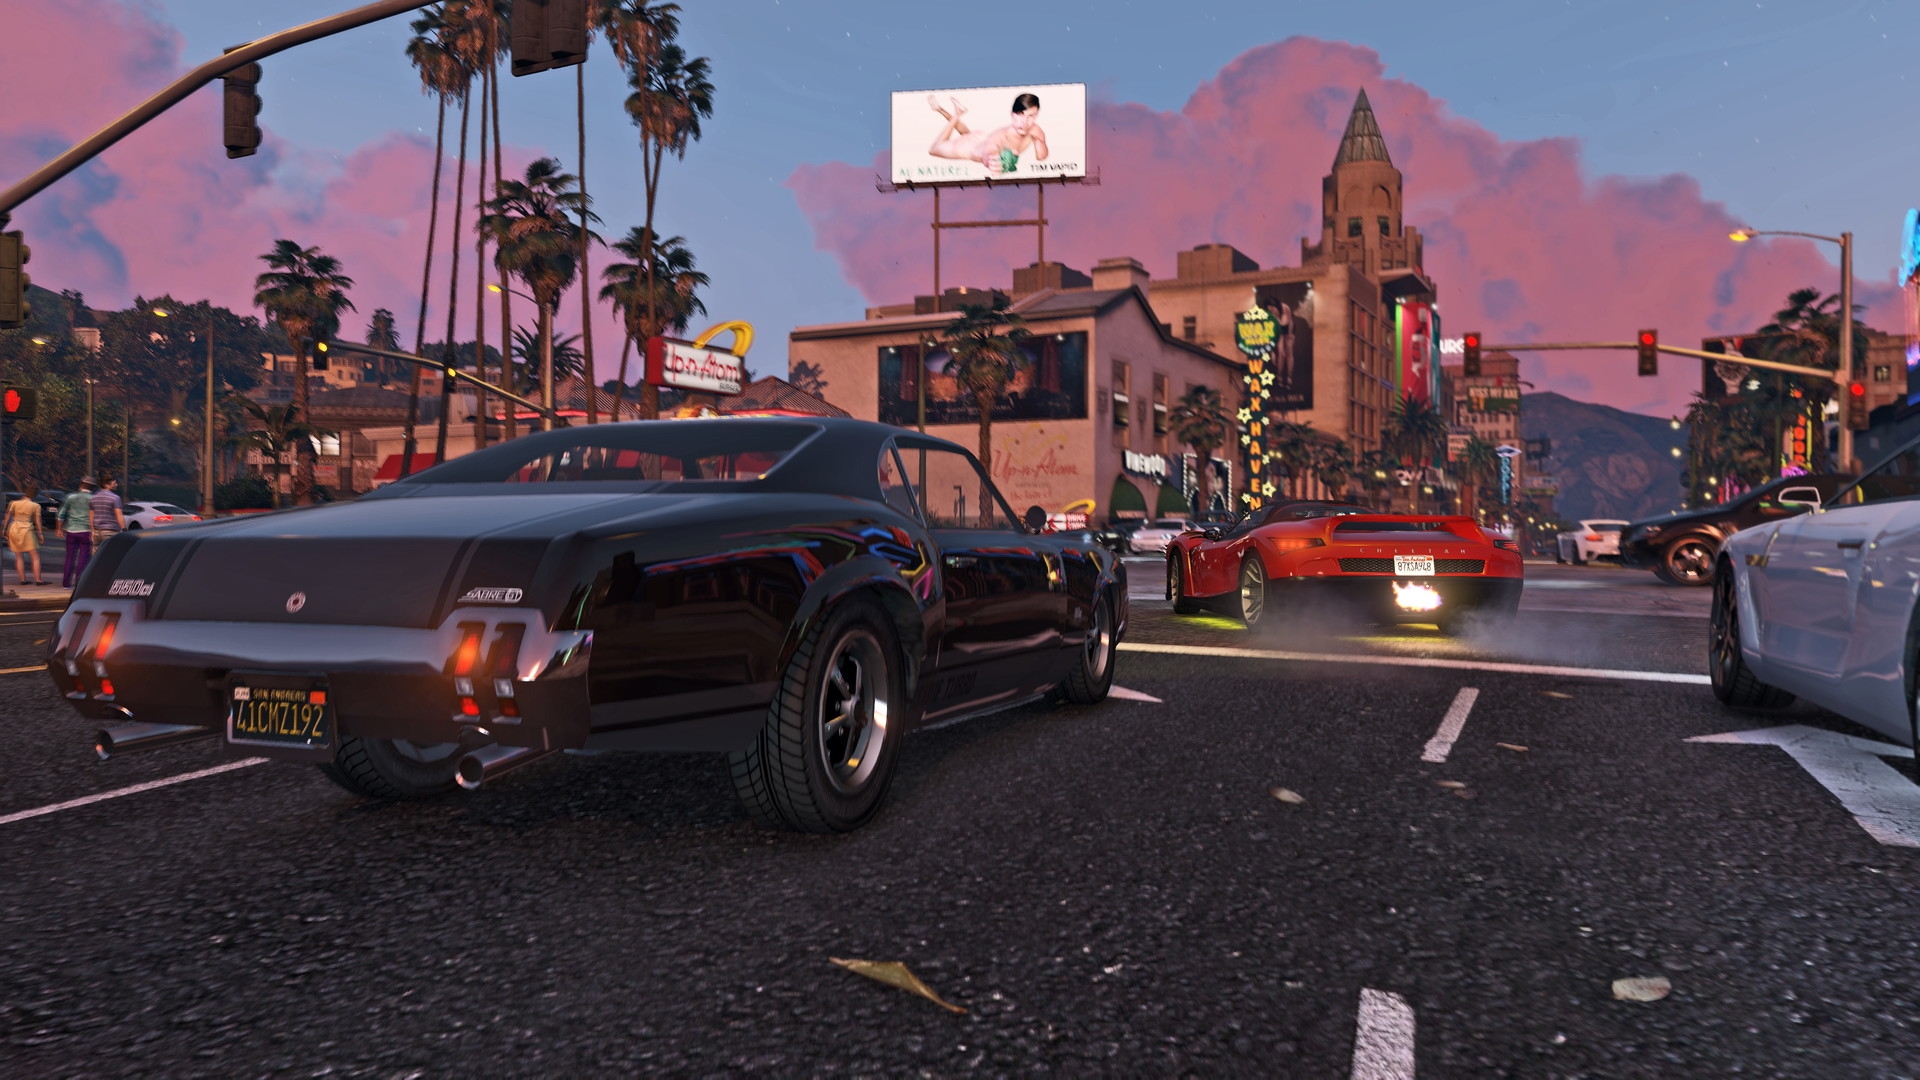 GTA 6 release date rumors, news, and speculation